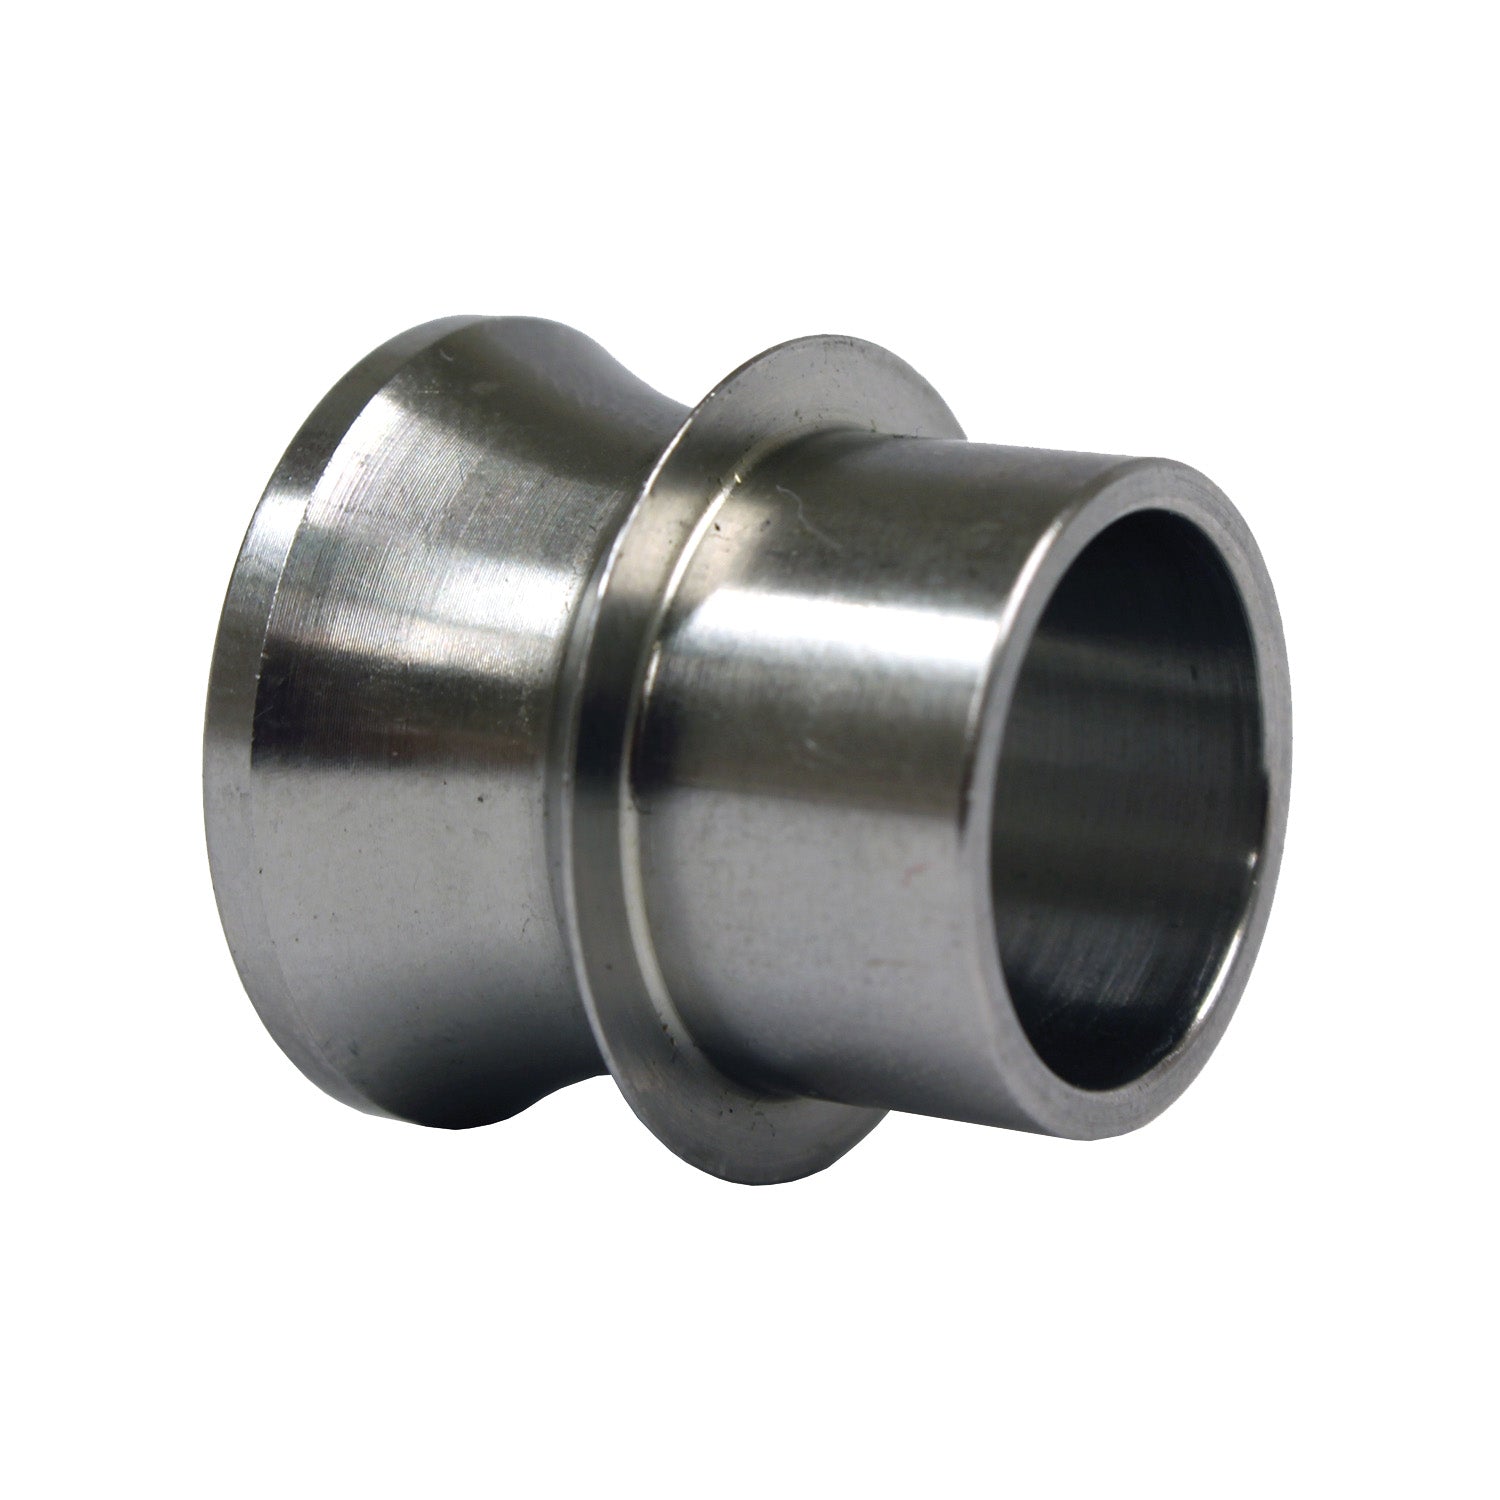 QA1 SN10-815-W High Misalignment Spacer, .625 inch Od Ss, .5 inch X 2.5 inch Total Width